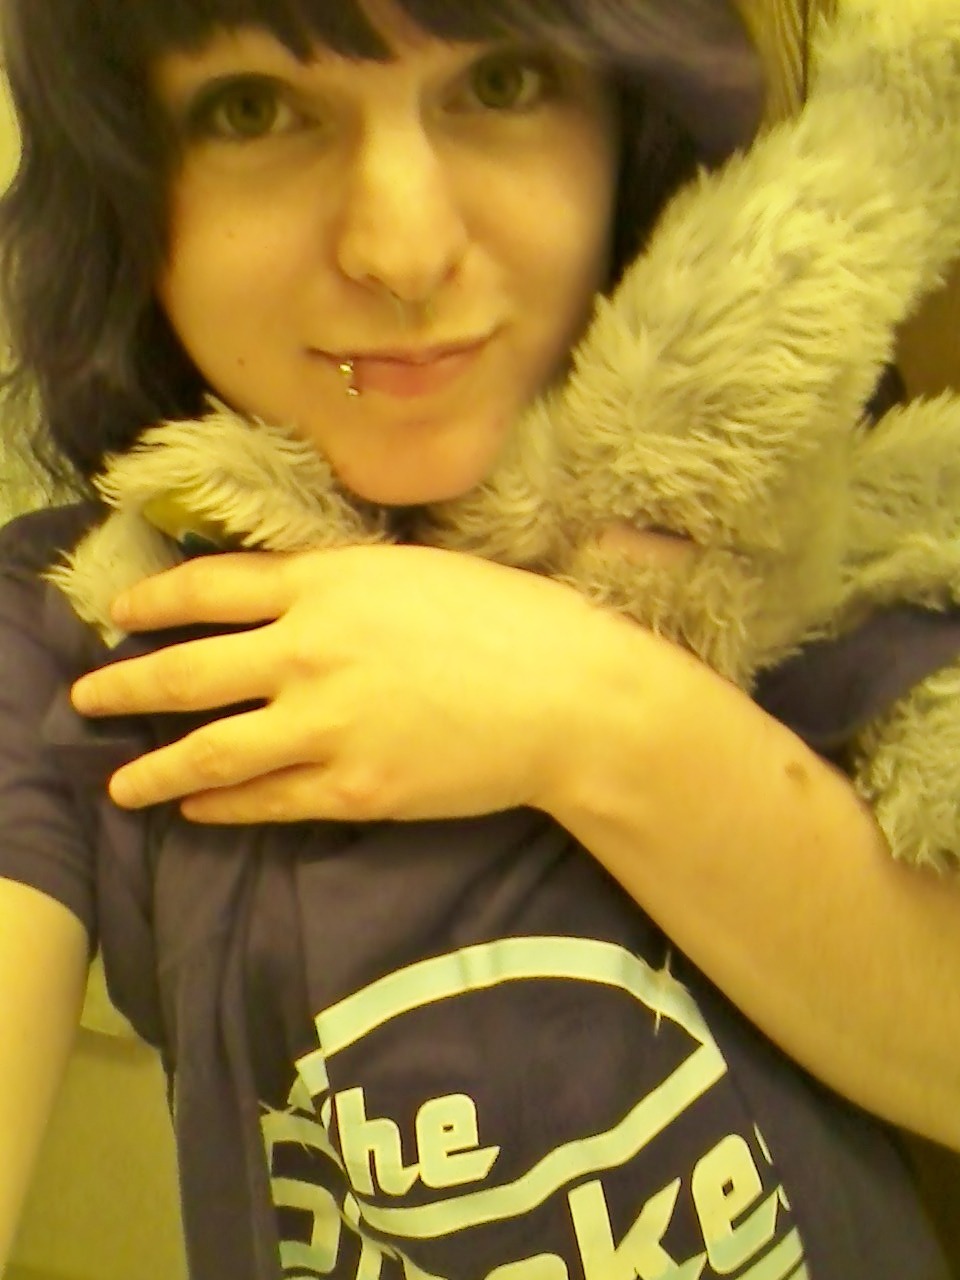 gf left a shirt here and it’s scratchy so rather than wear it to bed, i outfitted my elephant, edgar, with it (: